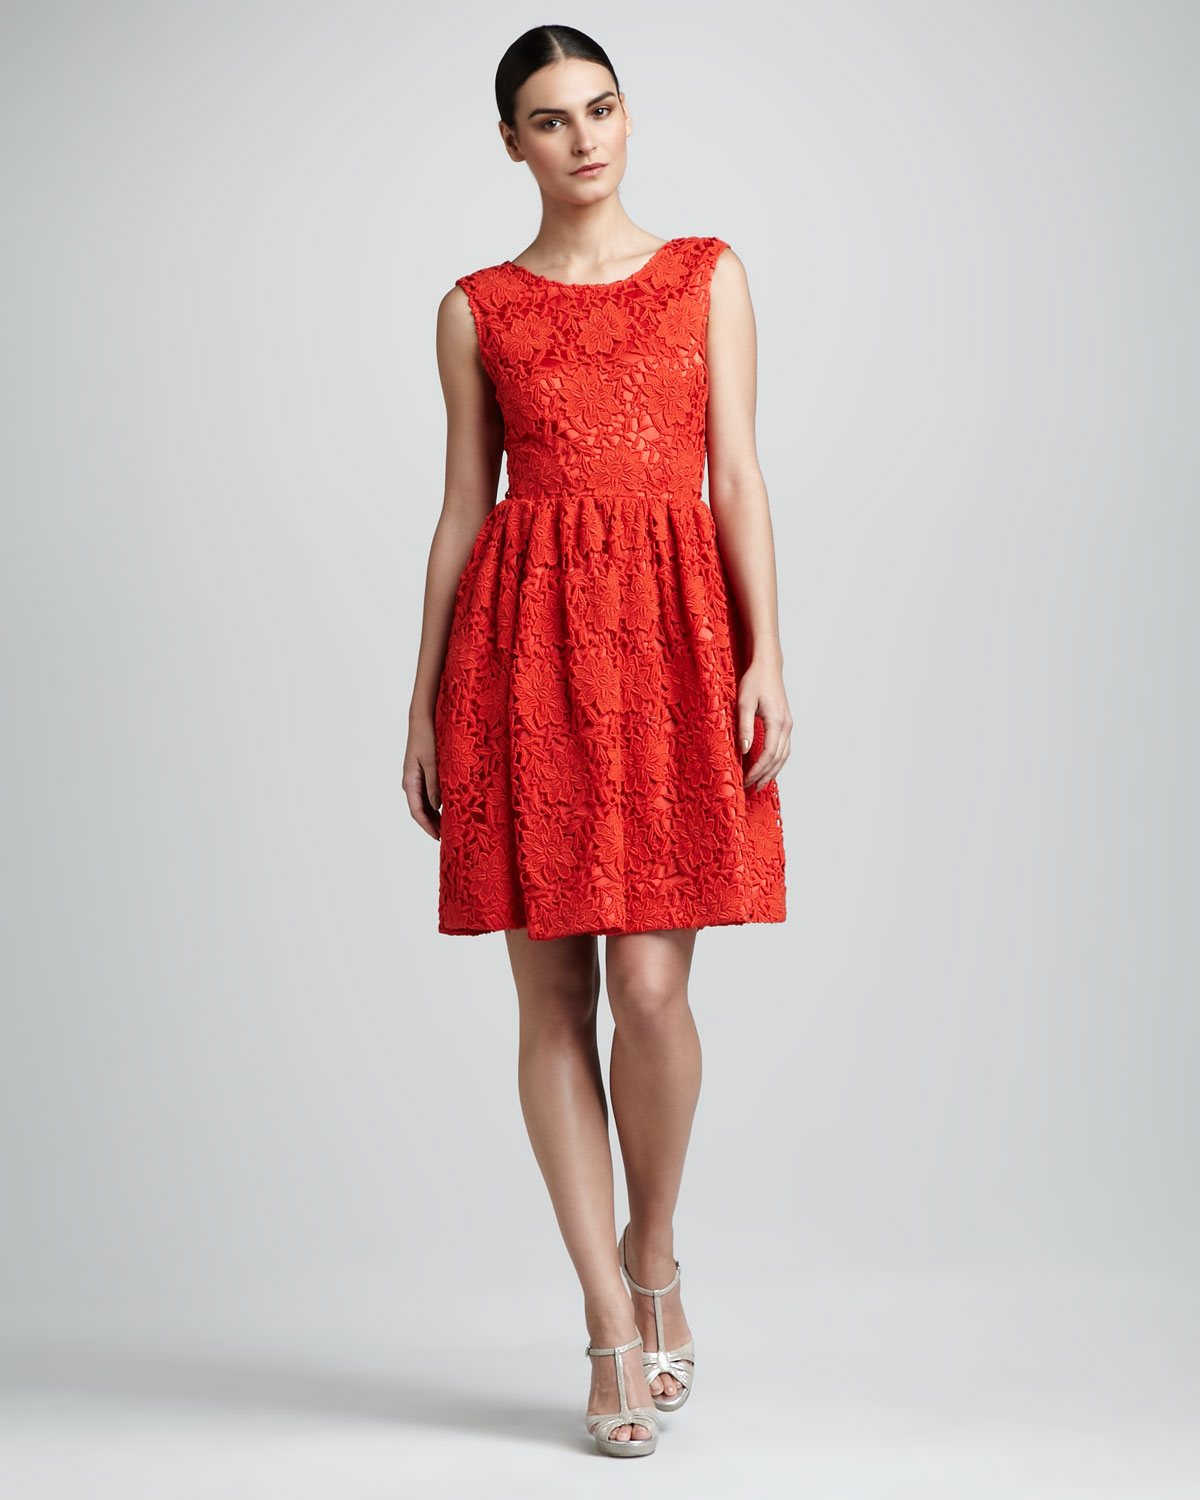 Kate Spade Selita Sleeveless Floral Dress in Red - Lyst